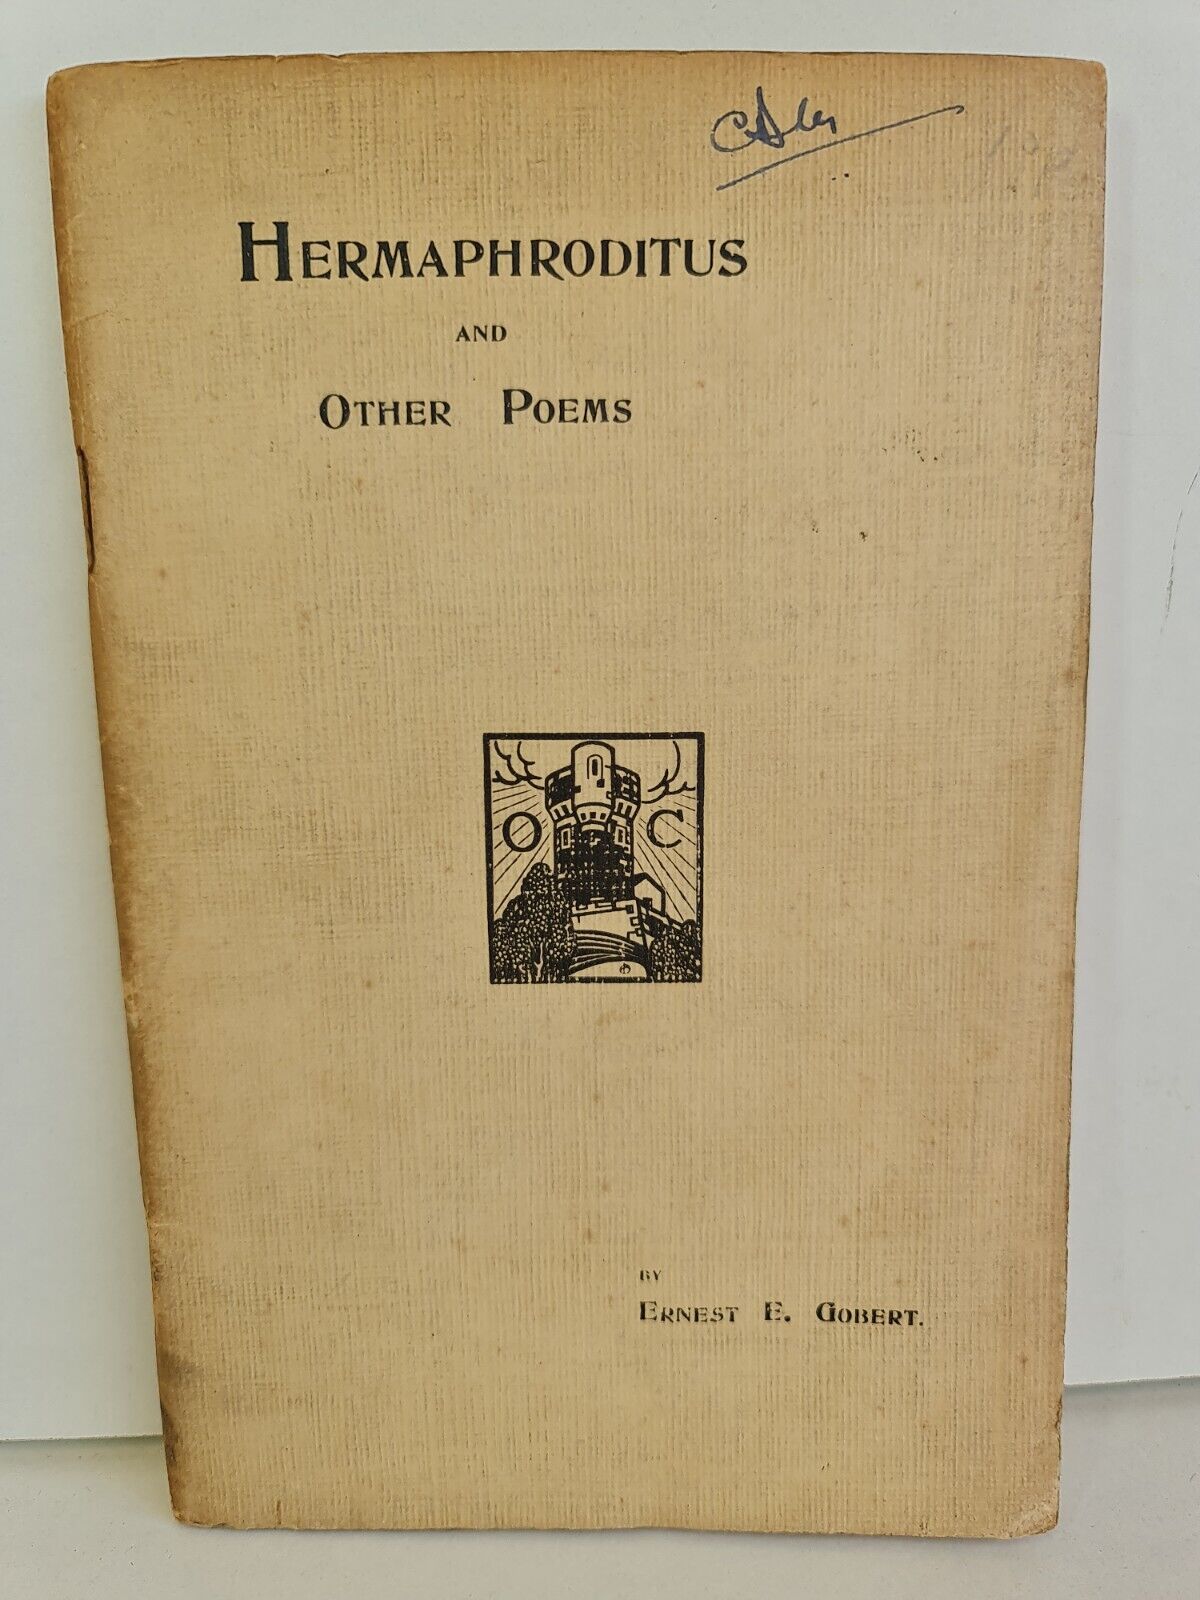 Hermaphroditus and Other Poems by Ernest Gobert